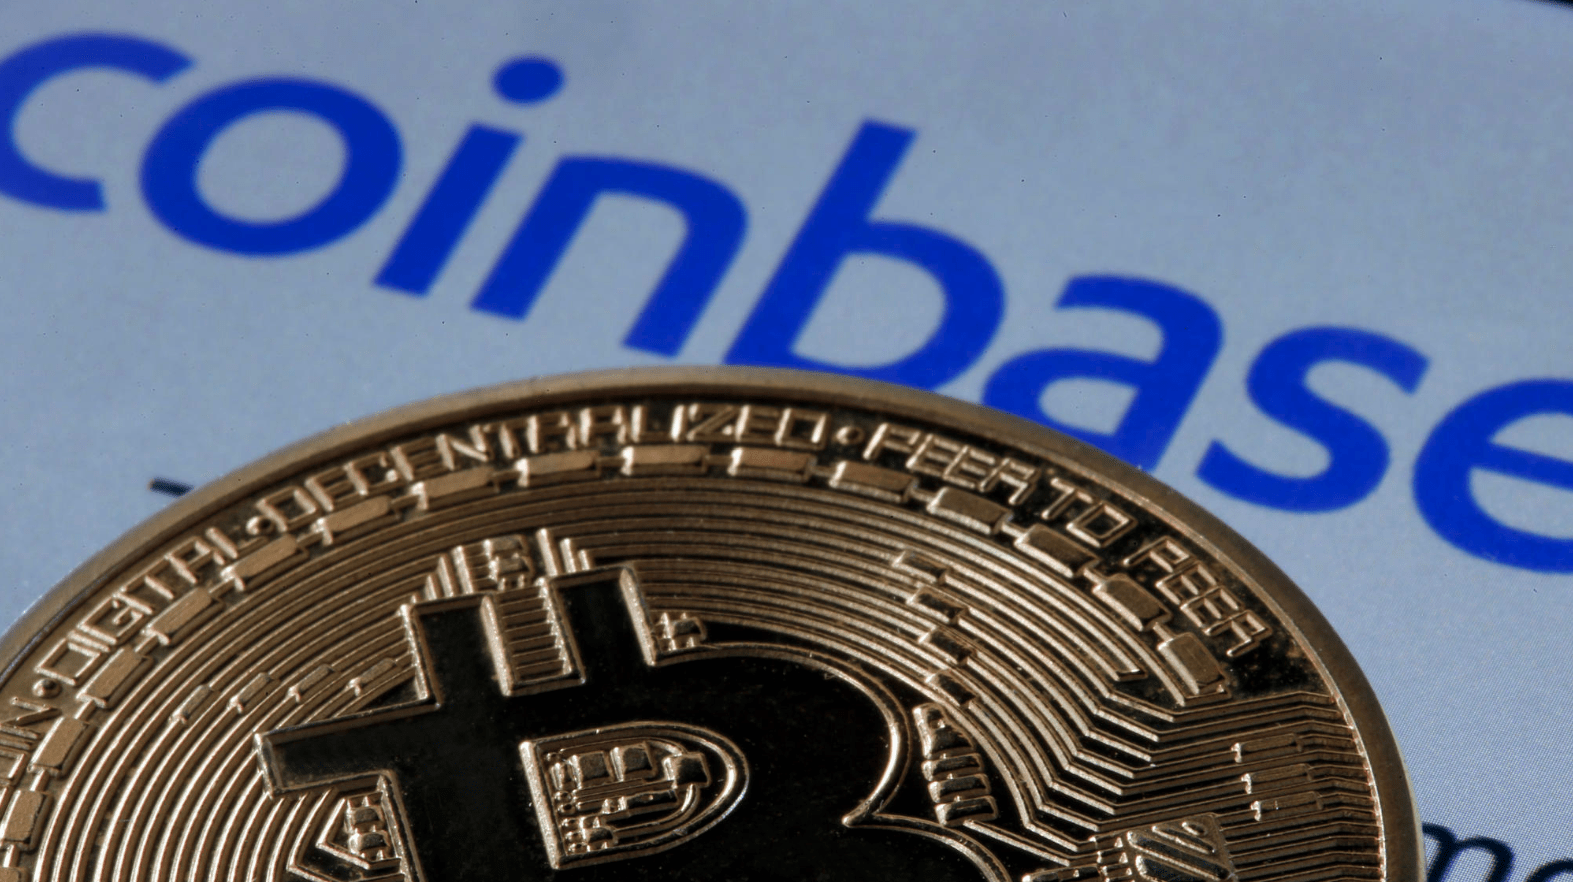 Blockchain.com CEO on Coinbase direct listing: "I think they’ll trade above $100B" by end of the week